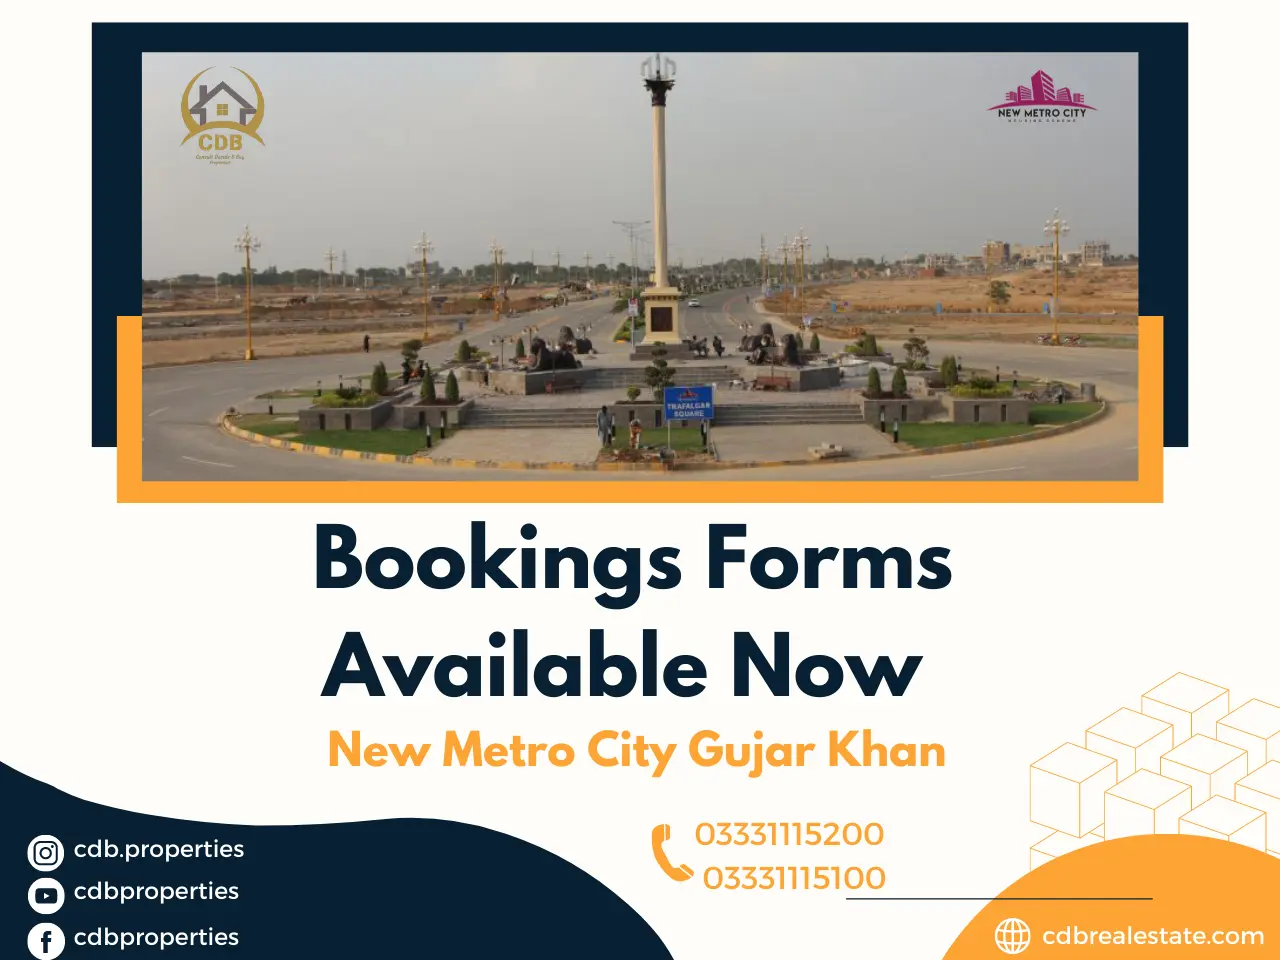 Bookings Forms Available Now For New Metro City Gujar Khan